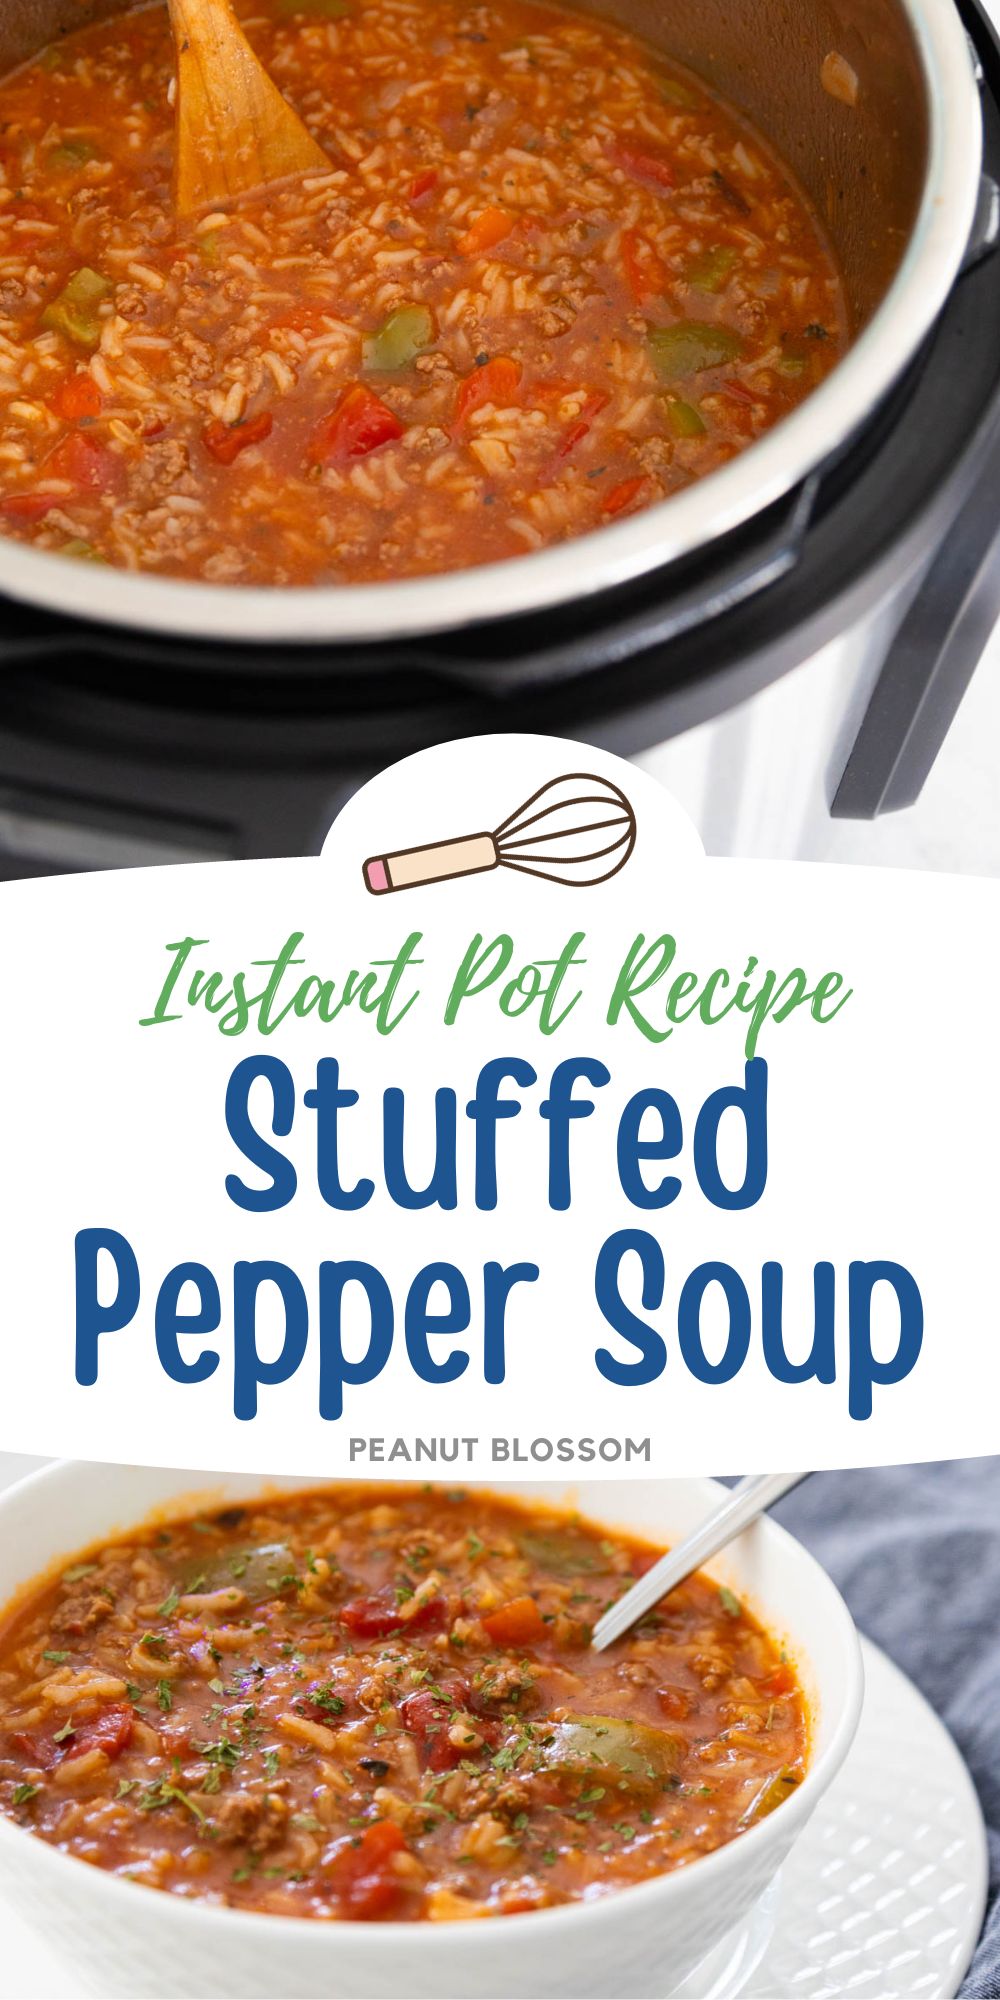 The photo collage shows the stuffed pepper soup cooking in the Instant Pot next to a bowl of the soup being served at the table.